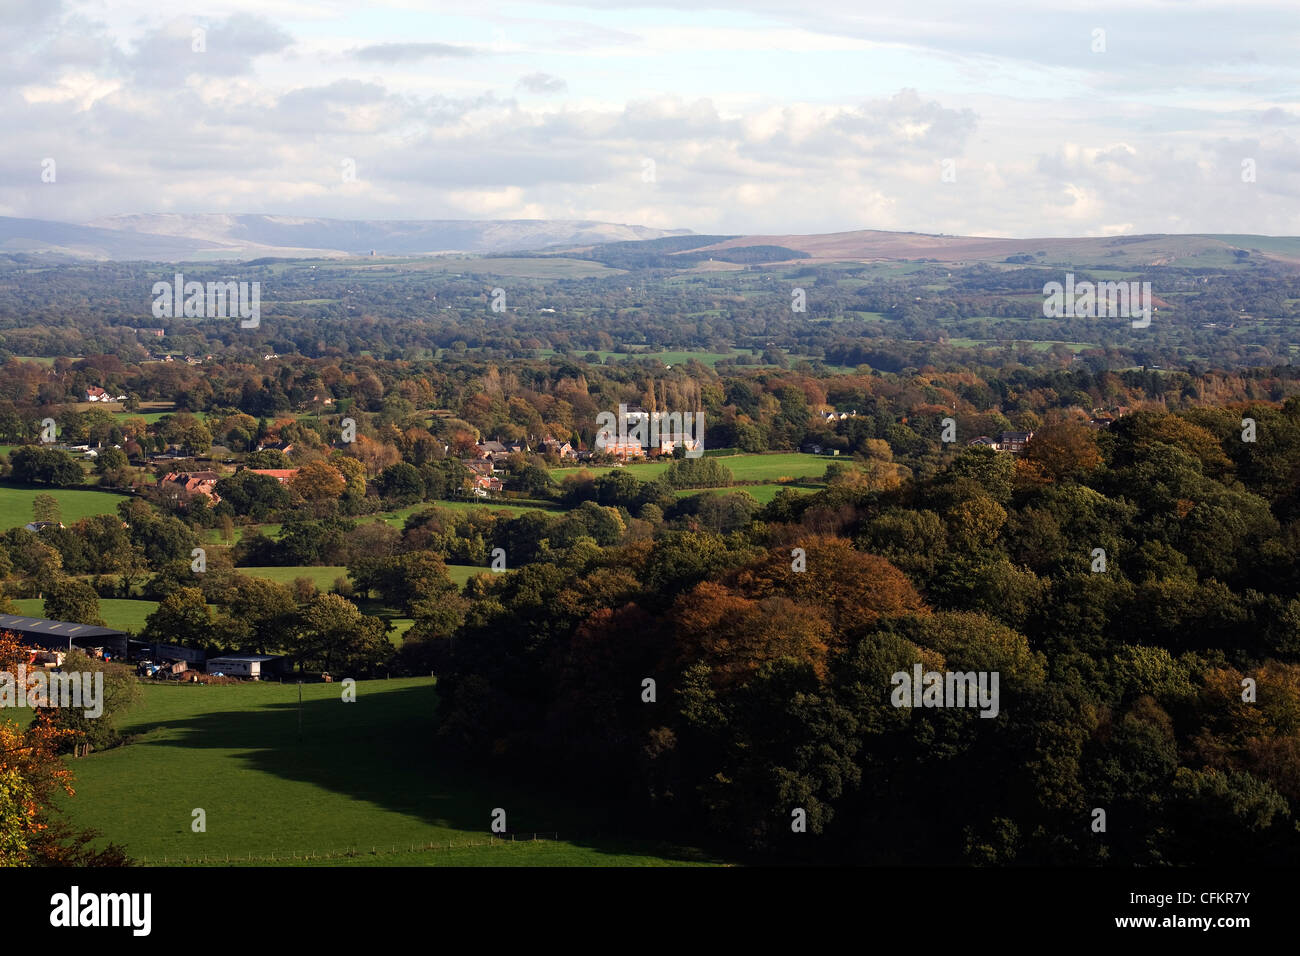 A view across The Cheshire Plain from Alderley Edge toward Kinder Scout and the Pennine Moors  Autumn Cheshire England Stock Photo